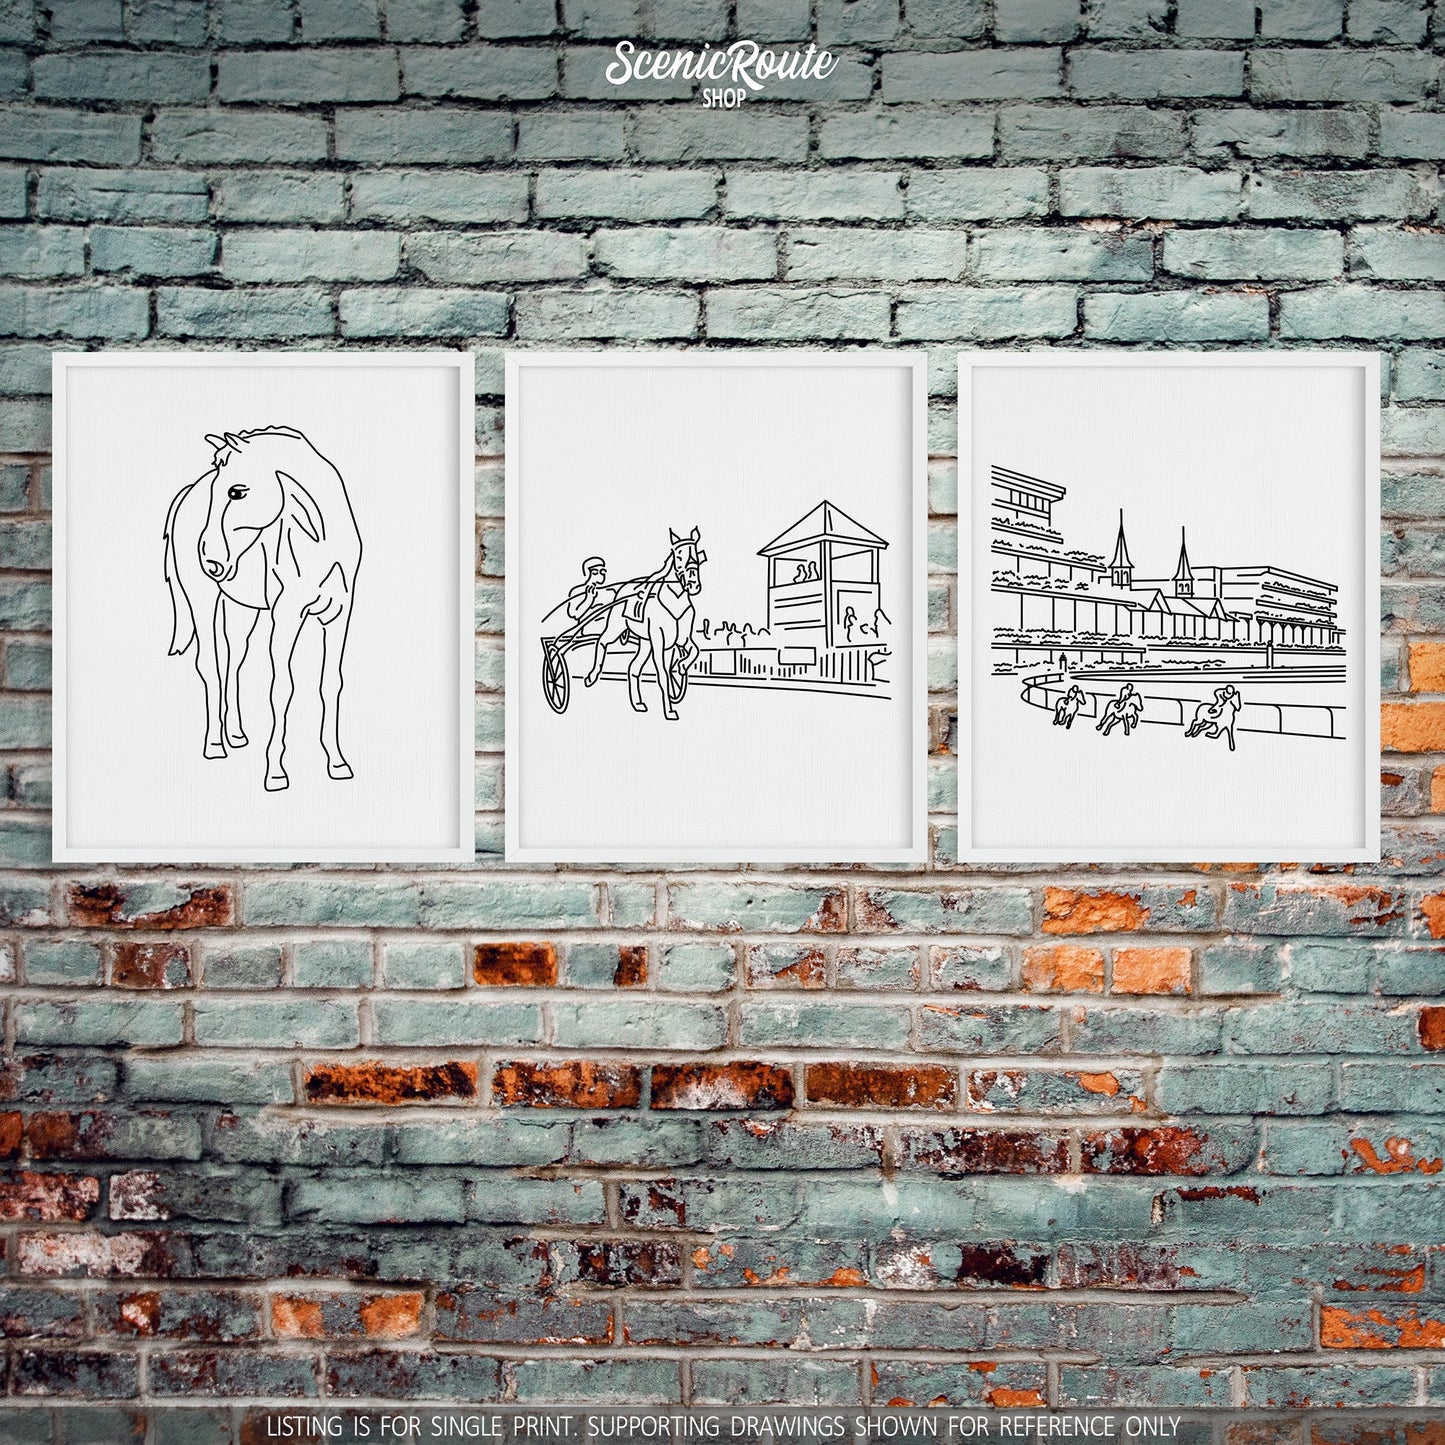 A group of three framed drawings on a brick wall. The line art drawings include a Horse, Harness Racing, and Churchill Downs